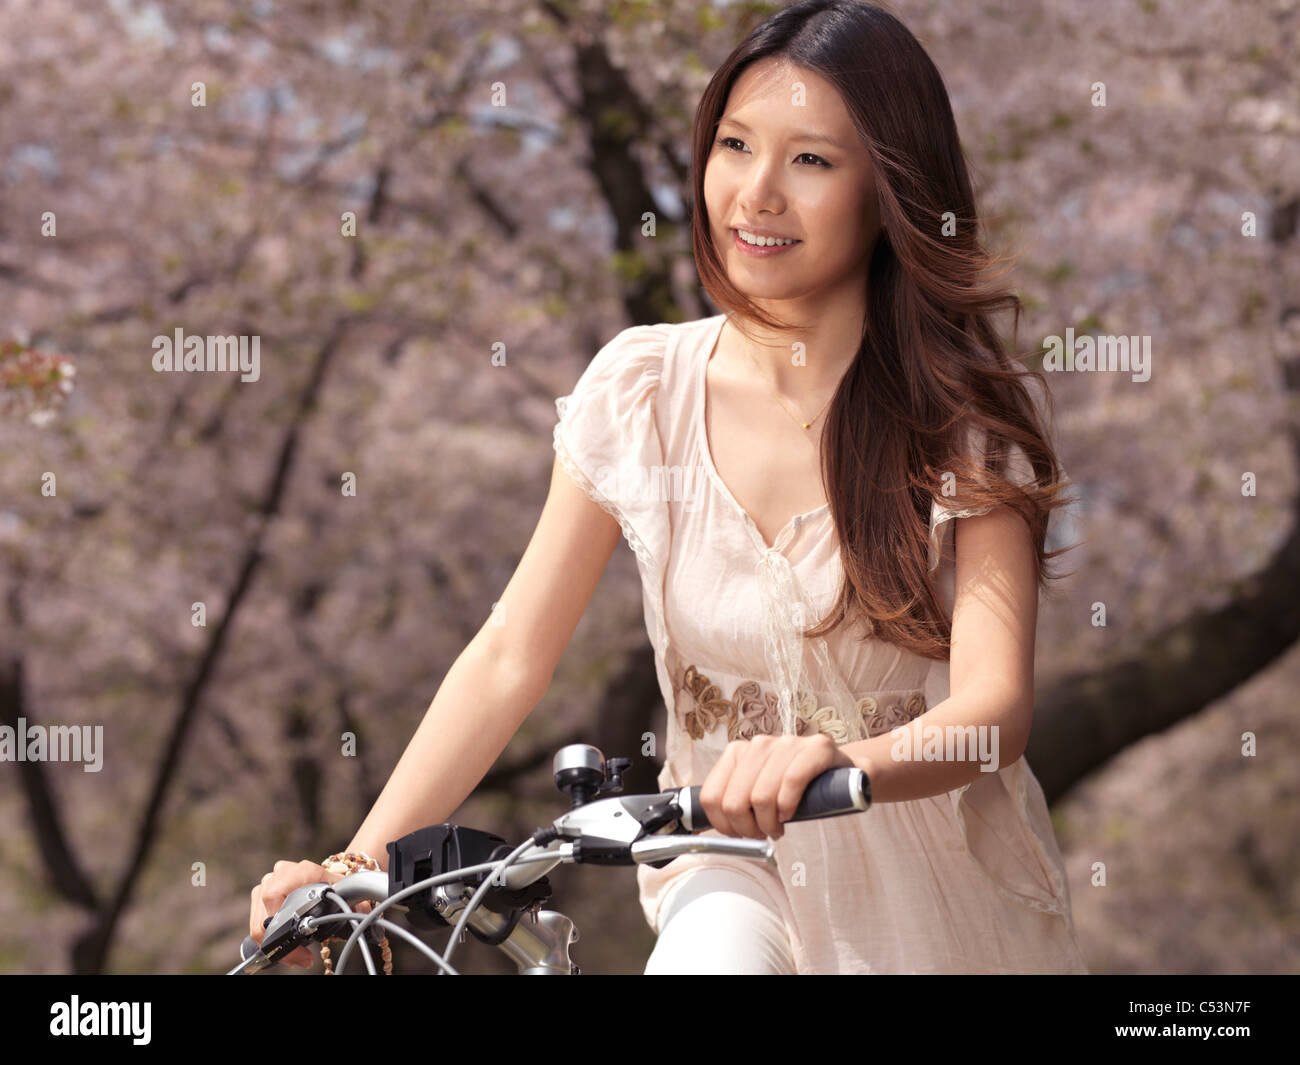 License available at MaximImages.com - Young smiling Asian woman riding a bicycle in a park past blooming cherry trees Stock Photo